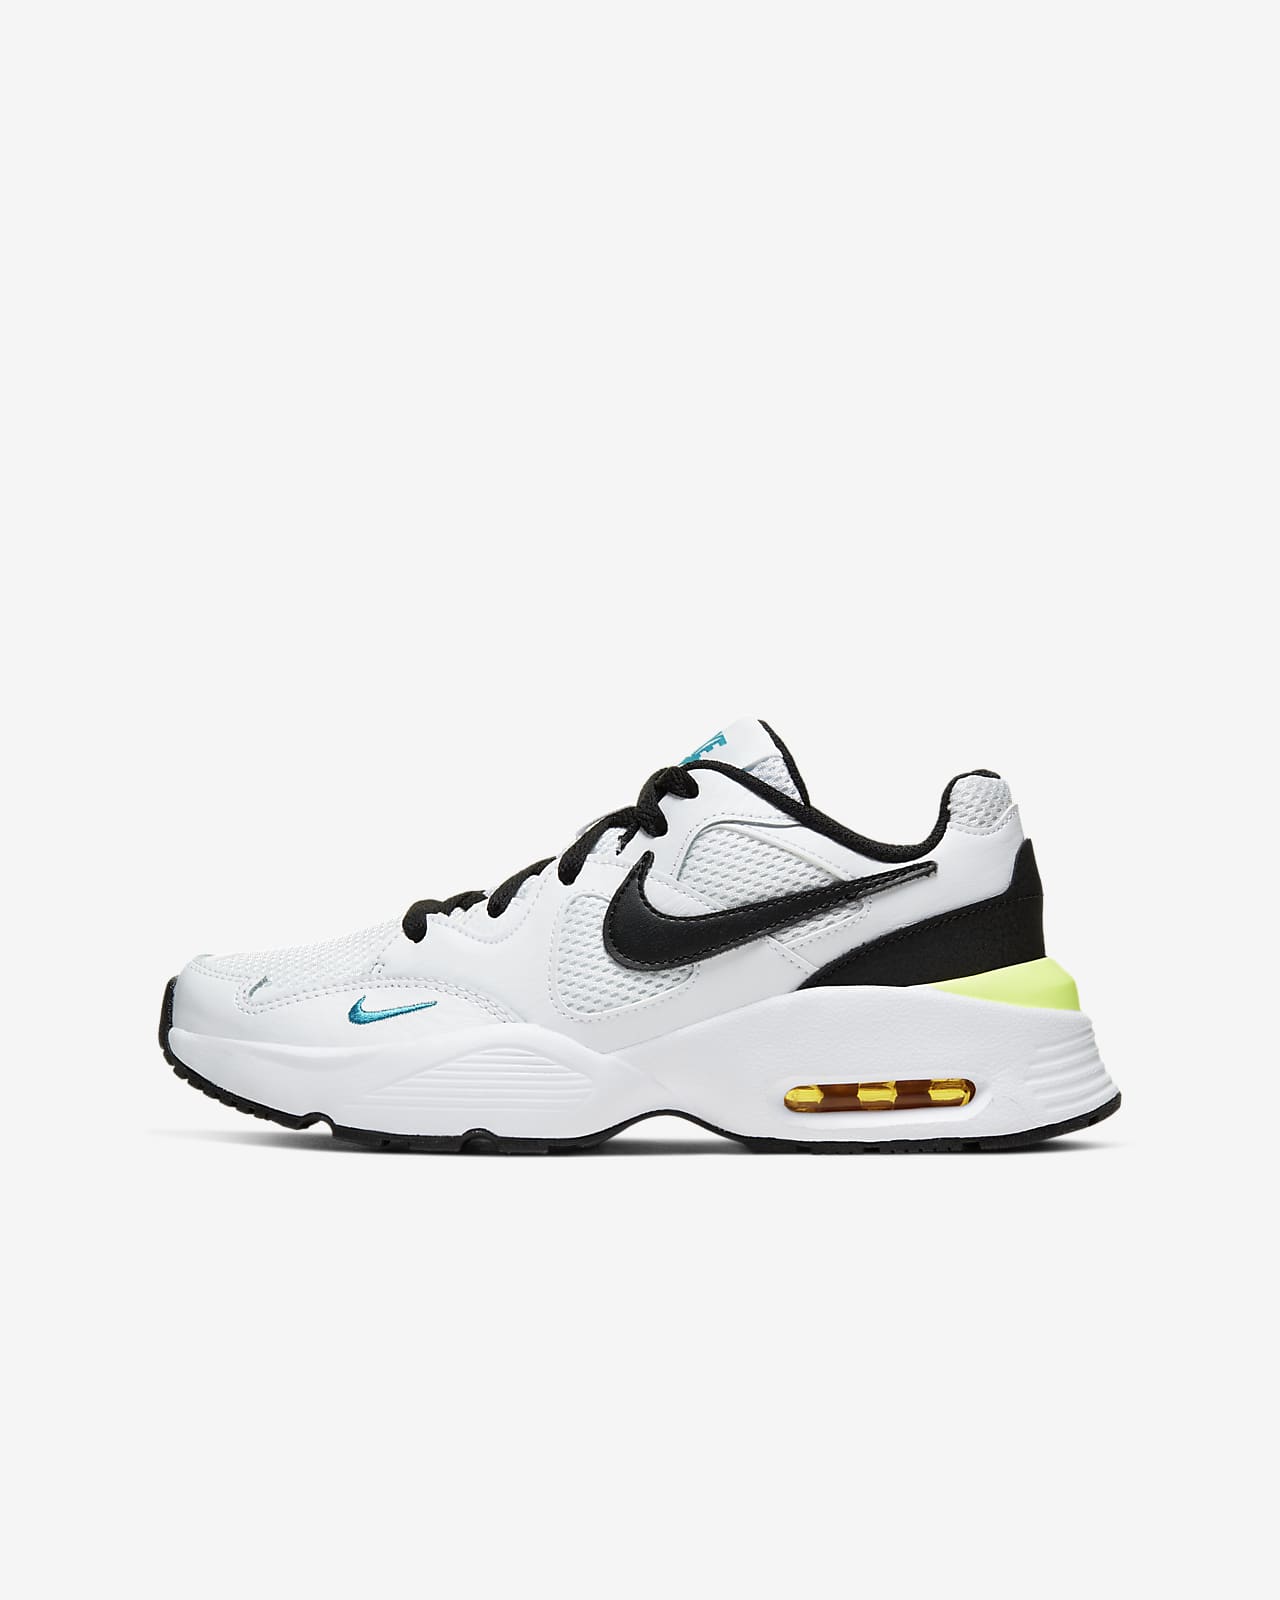 nike shoes 1500 price